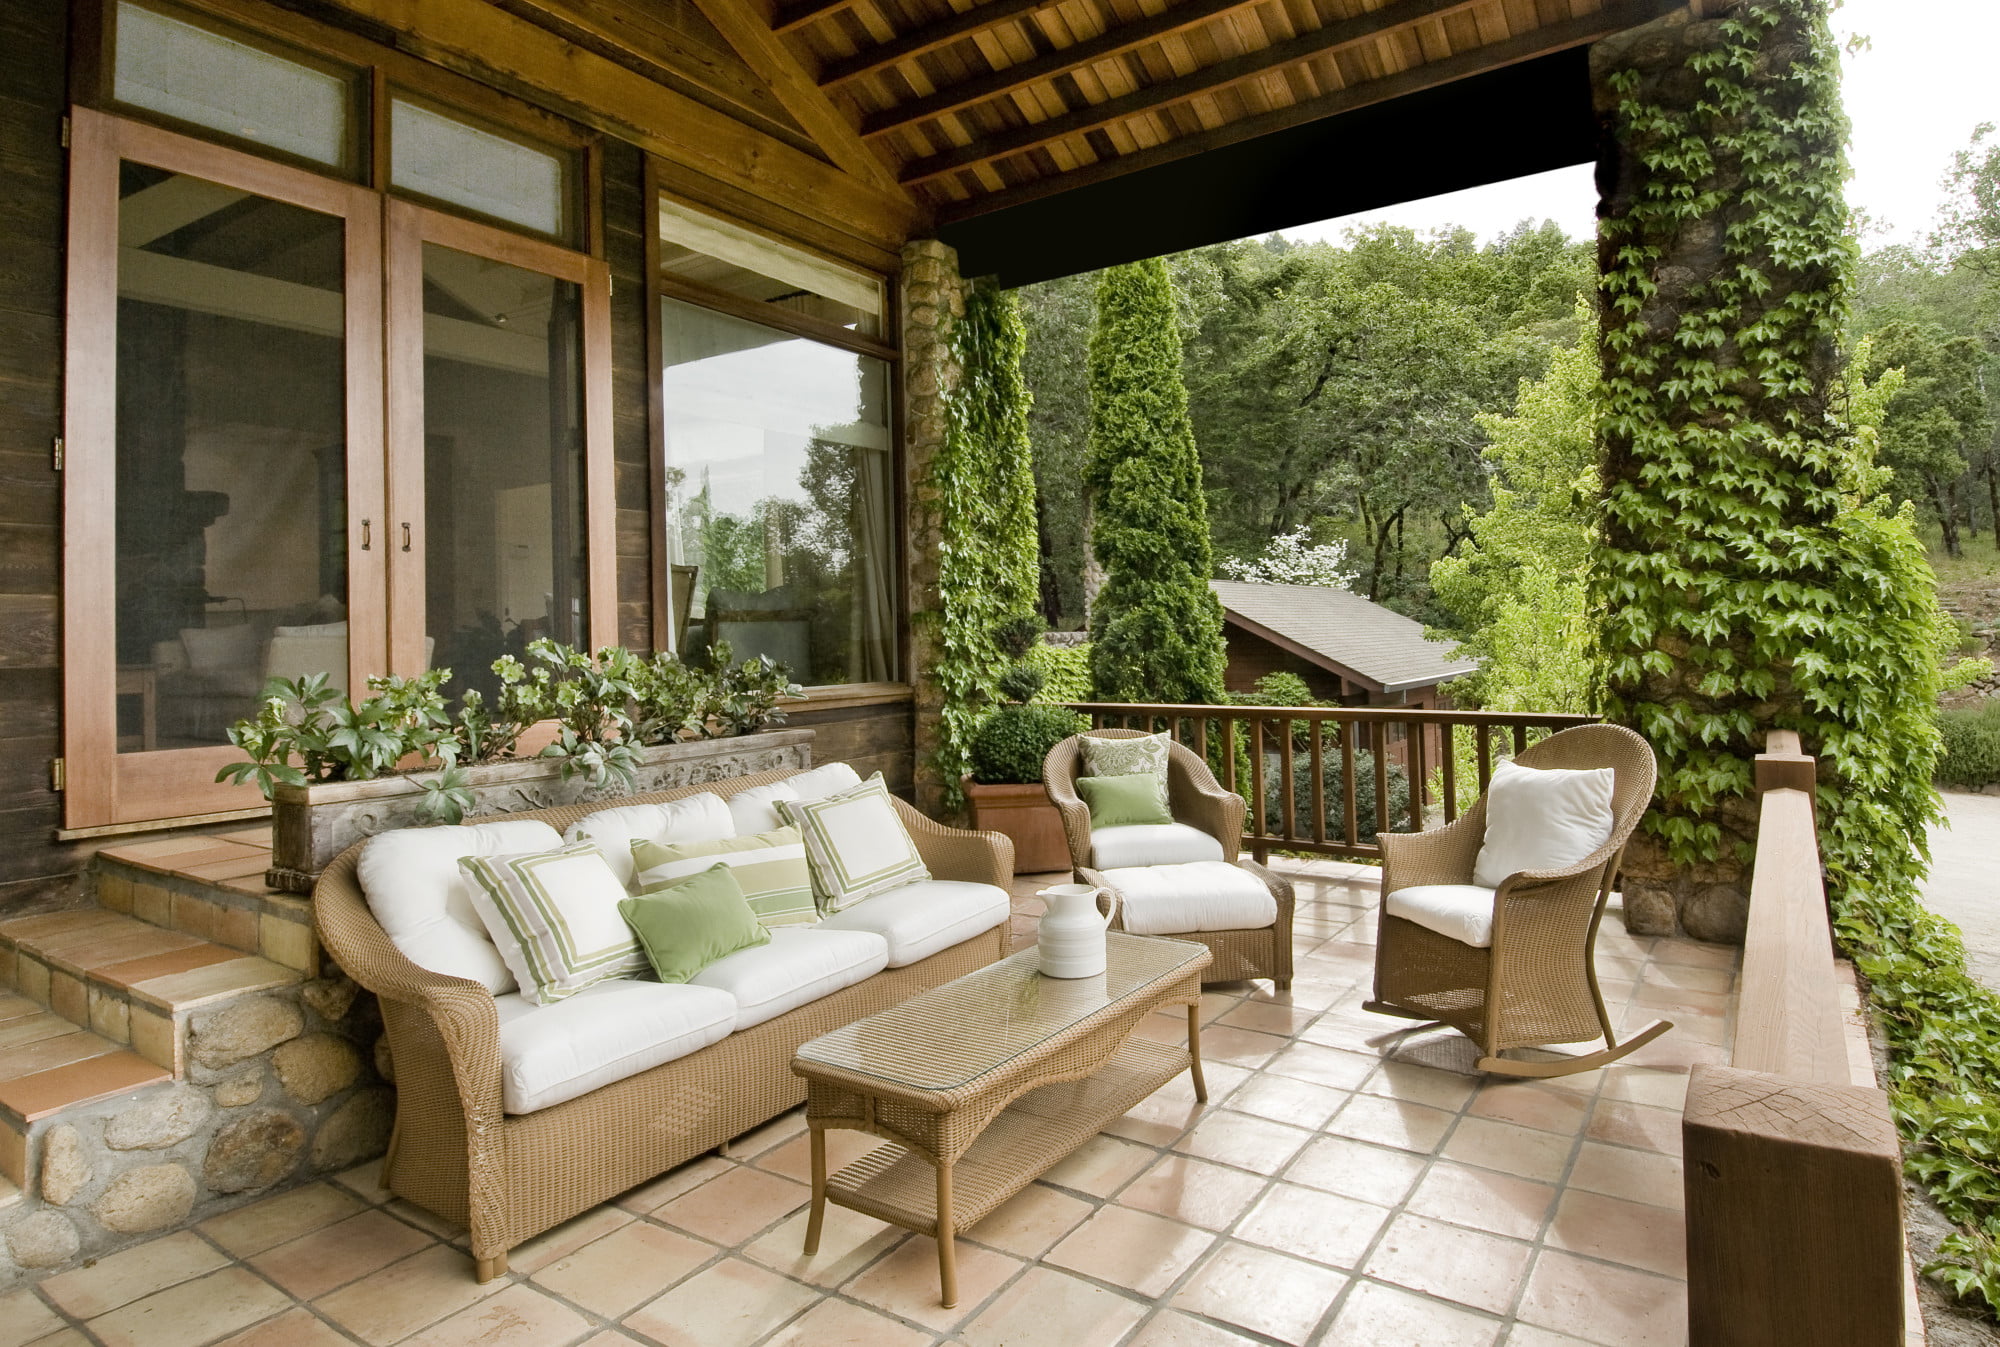 Want to upgrade your patio but aren't sure where to begin? Then keep reading as we give you five great ideas for a patio remodel for a fresh new look.